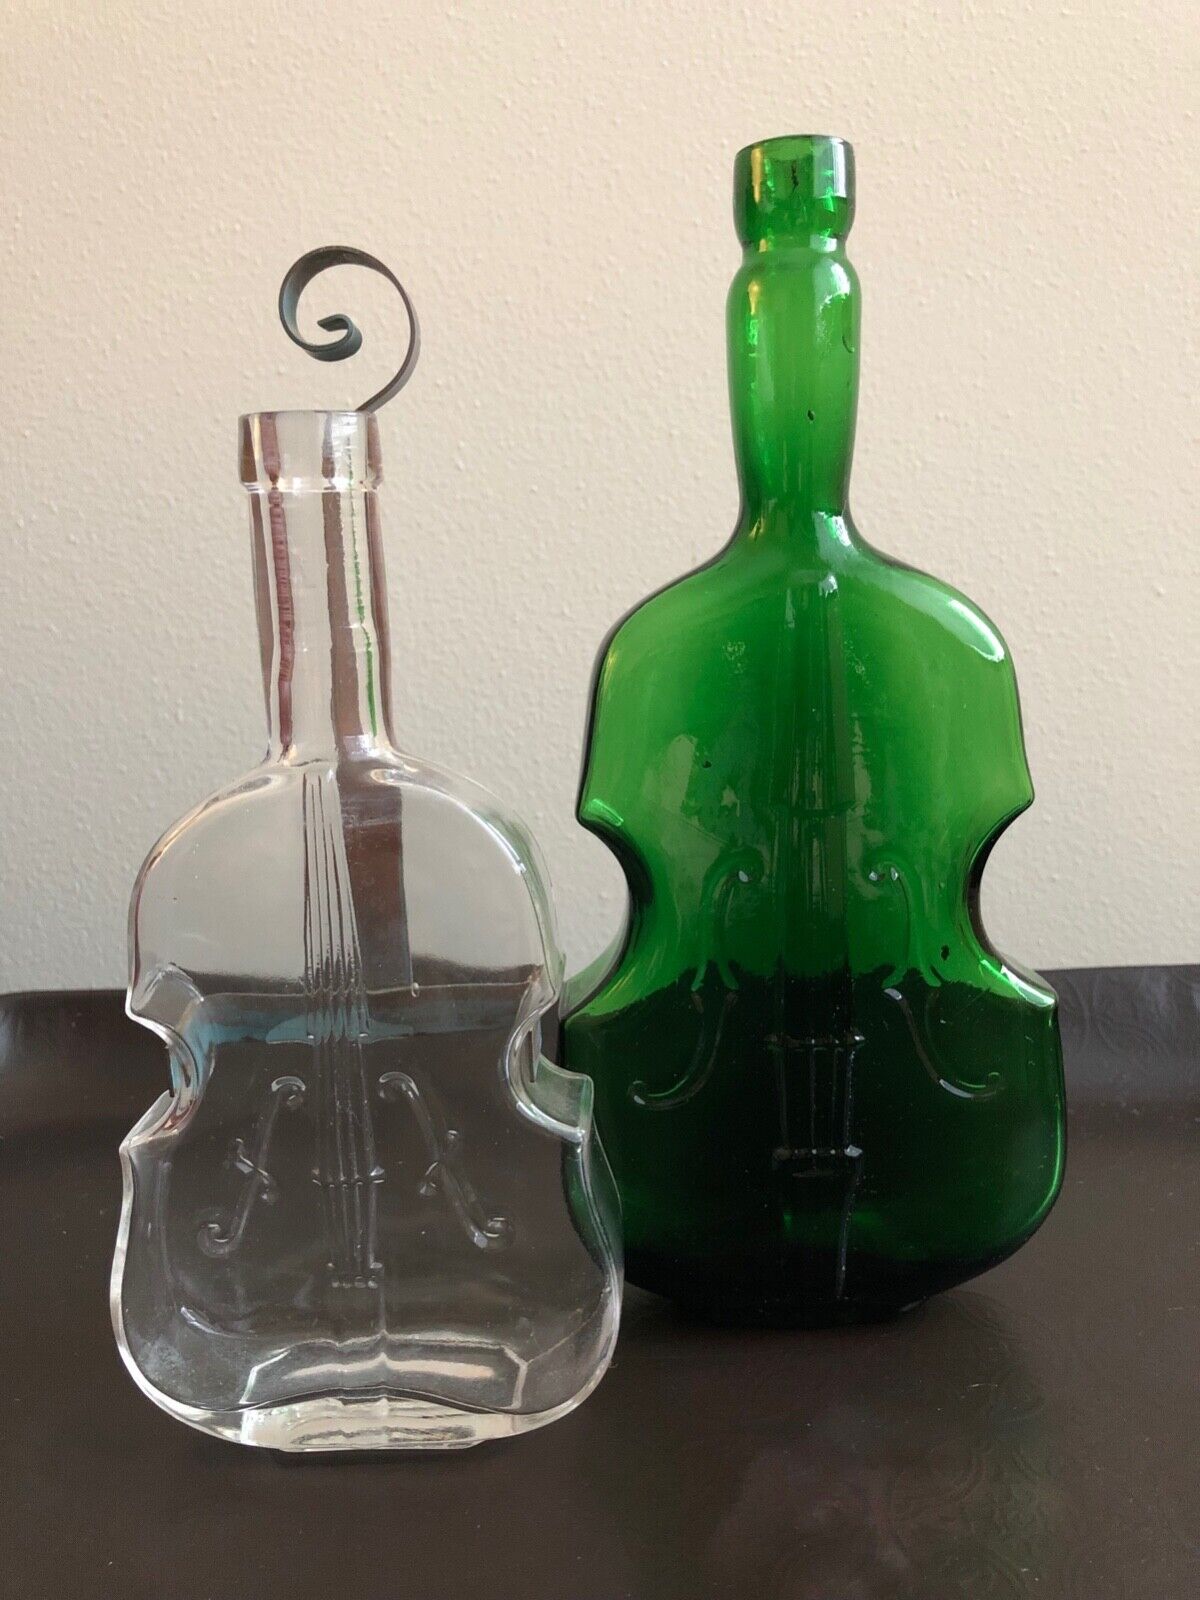 Rare clear glass violin vase with hanger and green Cello